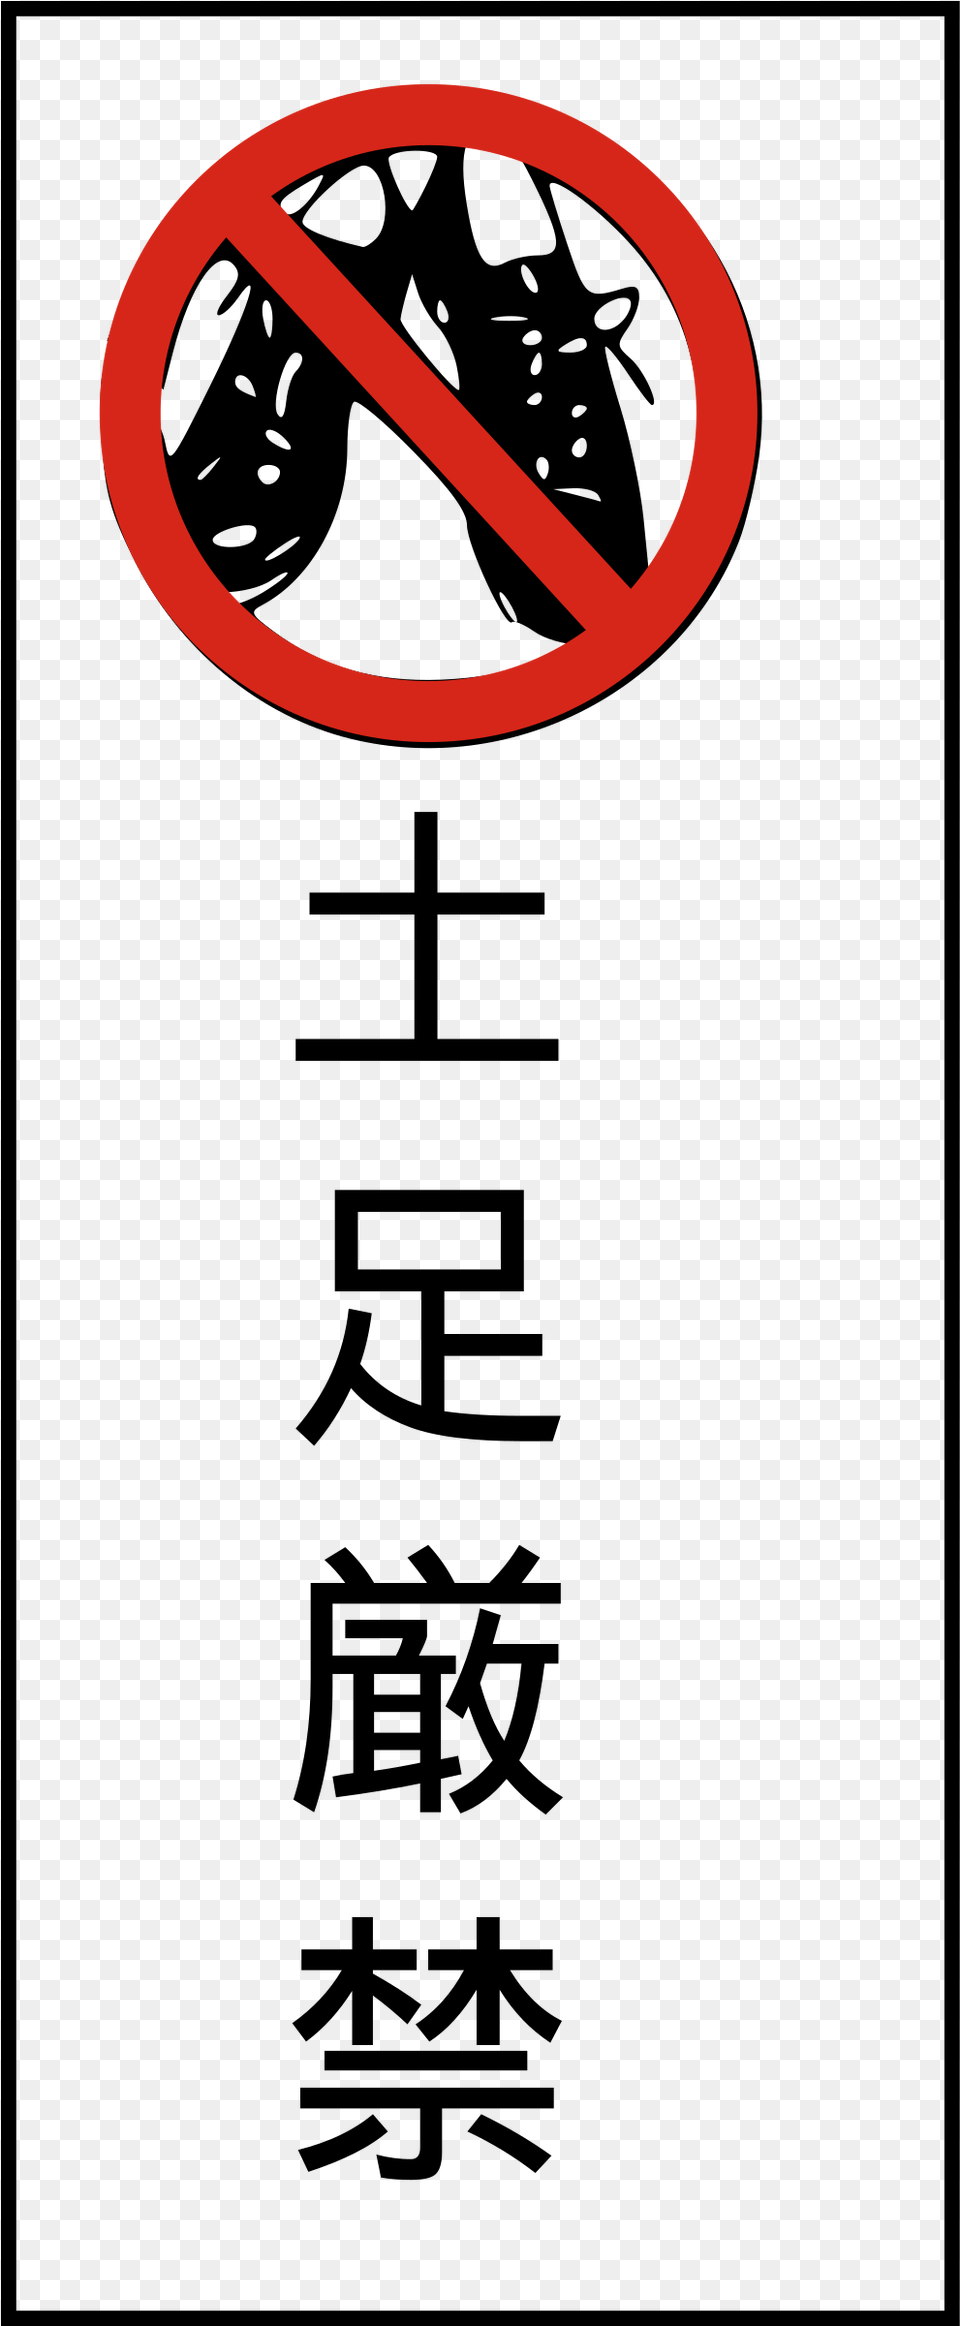 Japanese Text Please Remove Shoes Sign Japan, Symbol, Road Sign Png